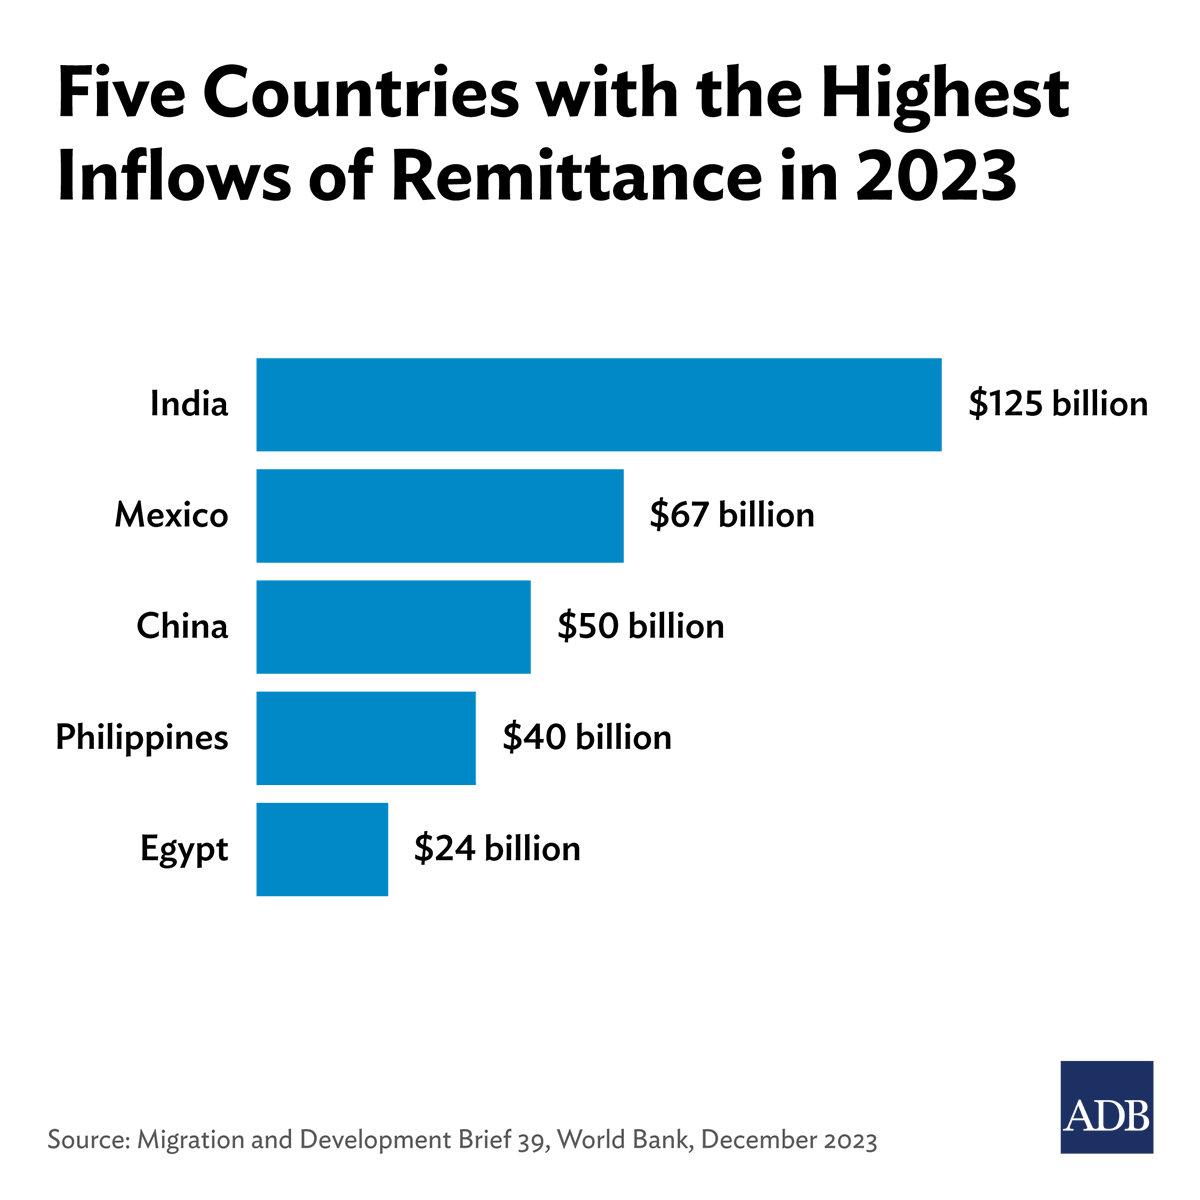 Did you know that remittances from migrant workers make up 9% of the Philippines’ GDP? A new ADB report explores the impact of these remittances, the role they play in reducing poverty, and their potential for creating long-term investment. Learn more: ow.ly/lIJe50QyC5v